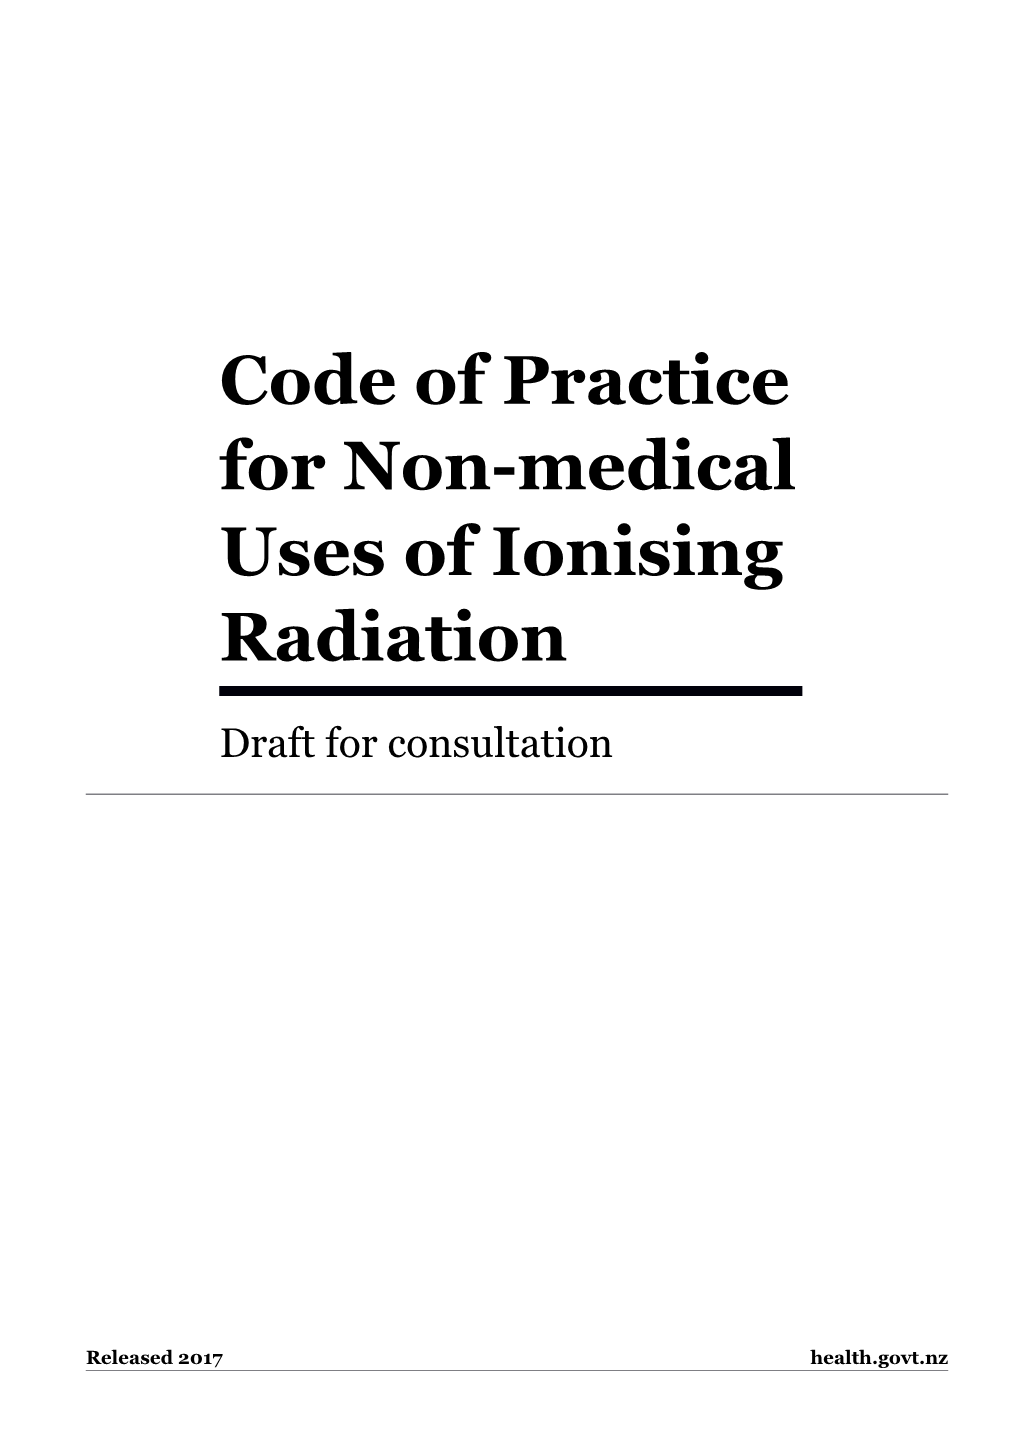 A Code of Practice for Non-Medical Uses of Ionising Radiation